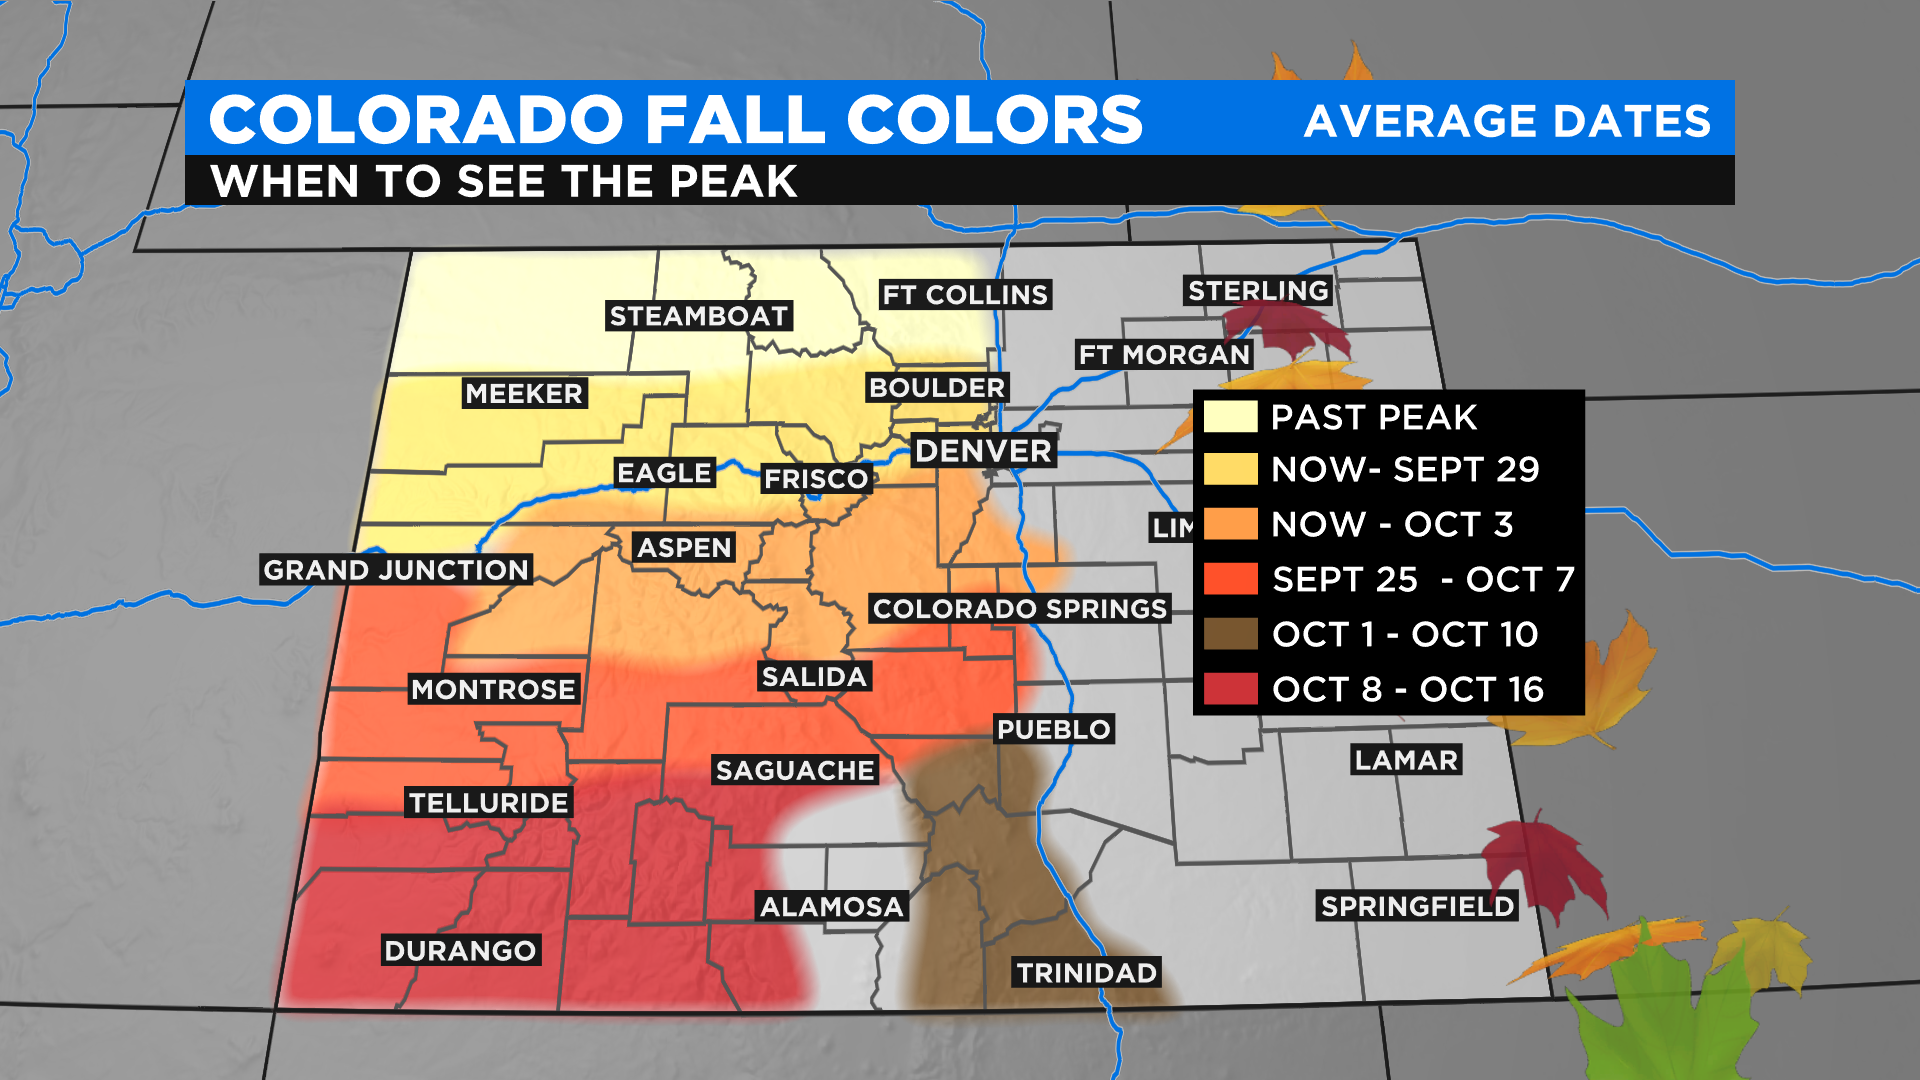 Saturday Best Weather To See Colorado Fall Color, Mountains Turn Cold